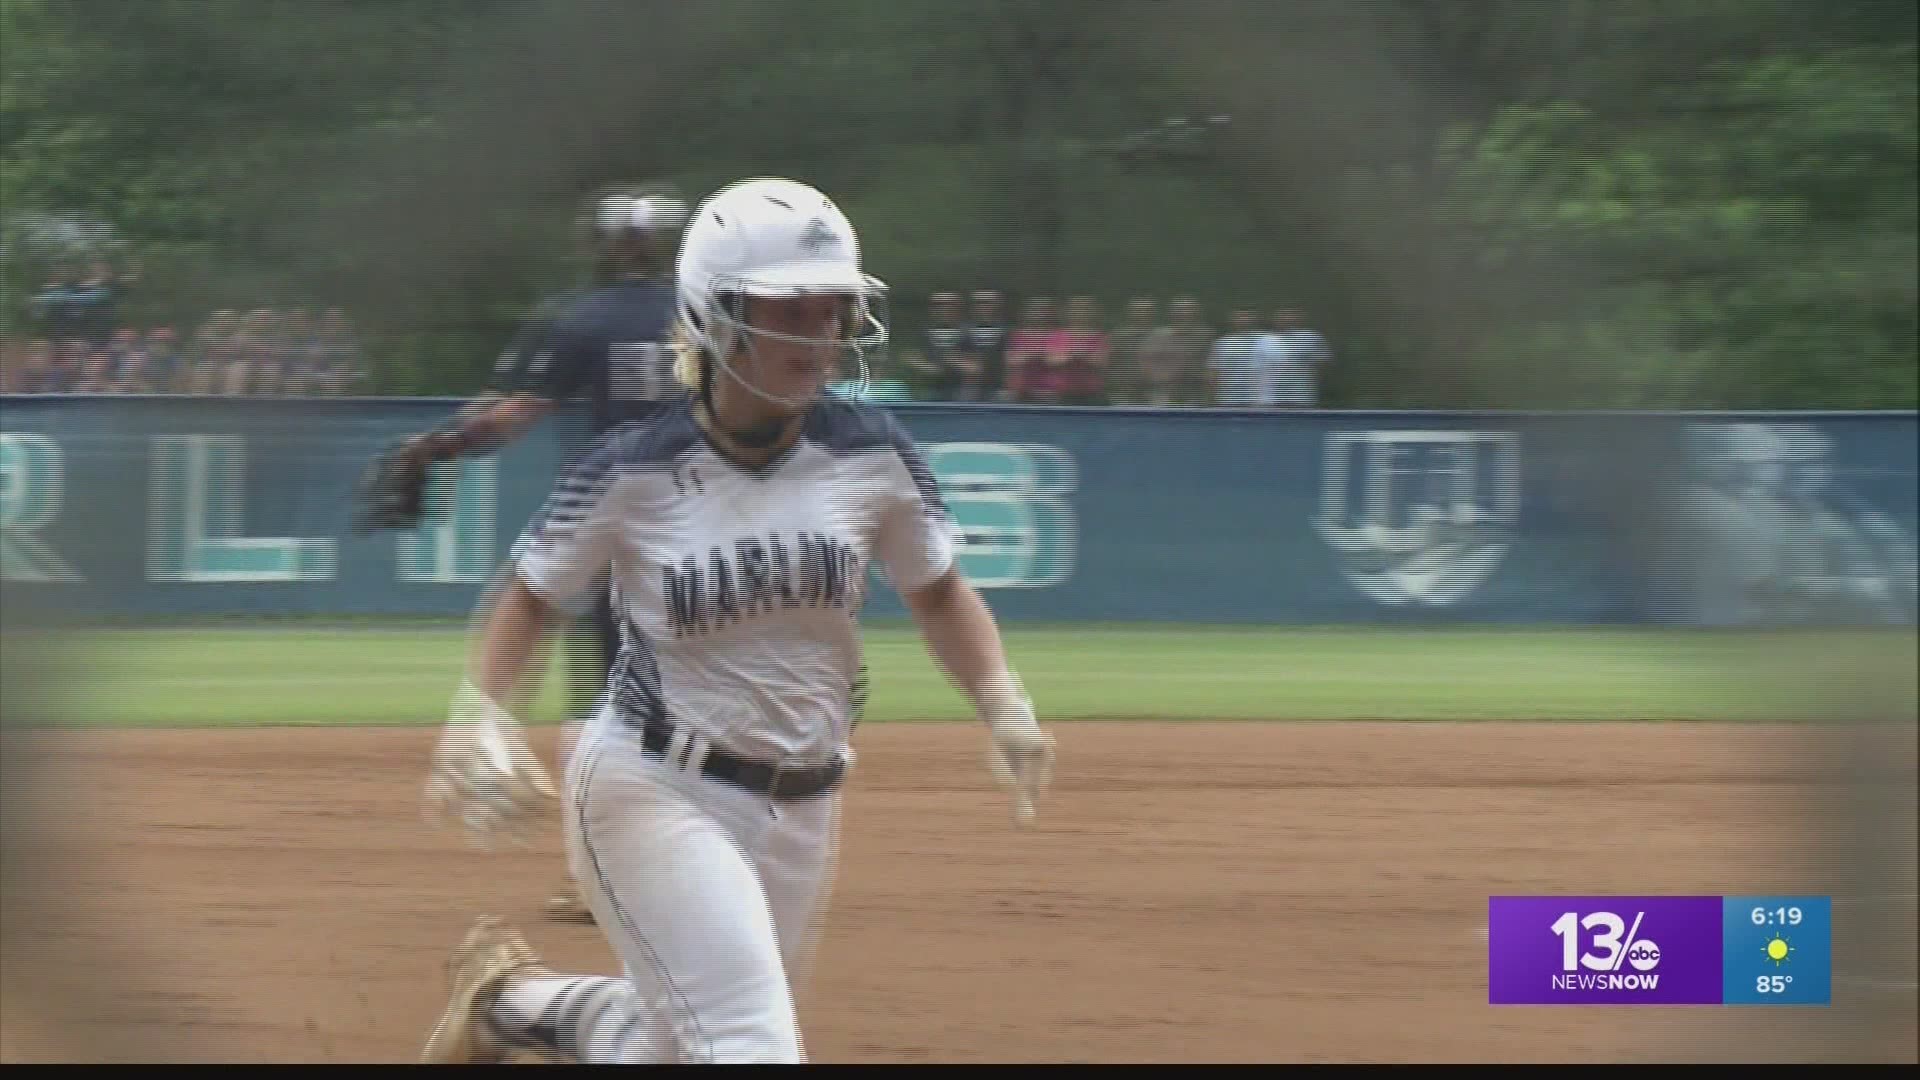 Kiersten Richardson delivered a single in the 8th inning as top ranked Virginia Wesleyan softball won over Berry 7-6 in extra innings. The Marlins head to their 2nd straight NCAA Championships.